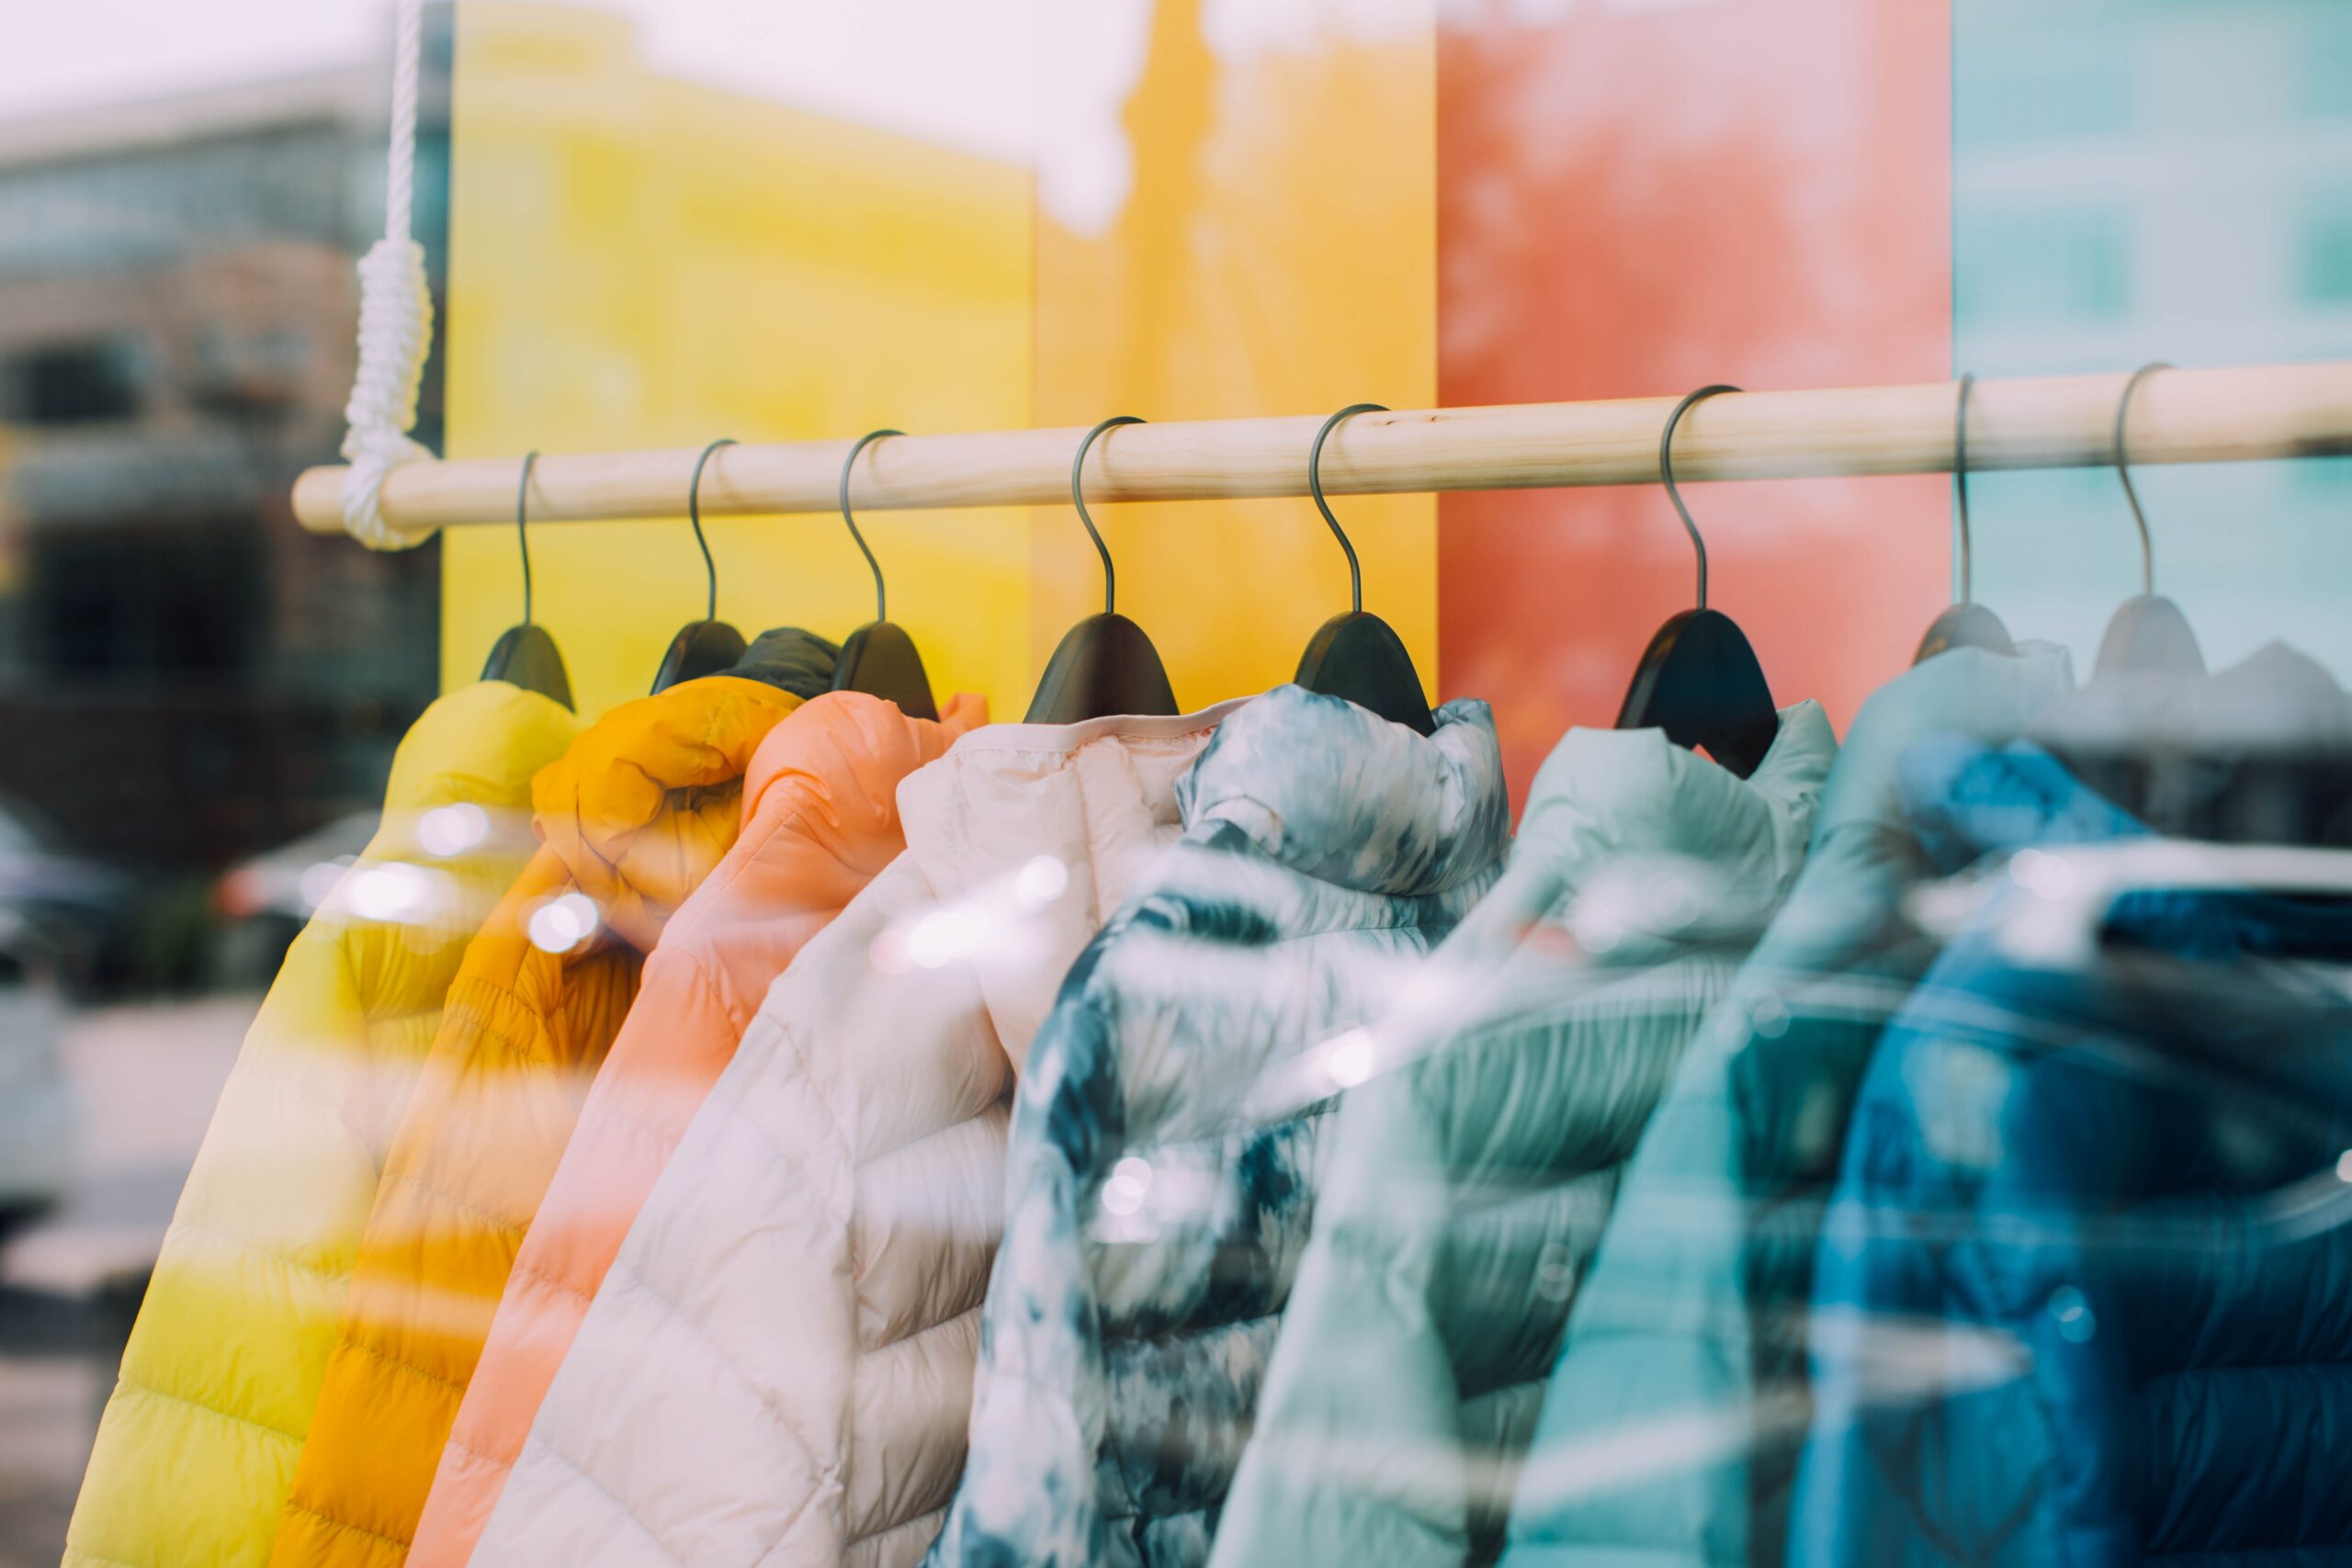 Colorful jackets pictured on rack in storefront.